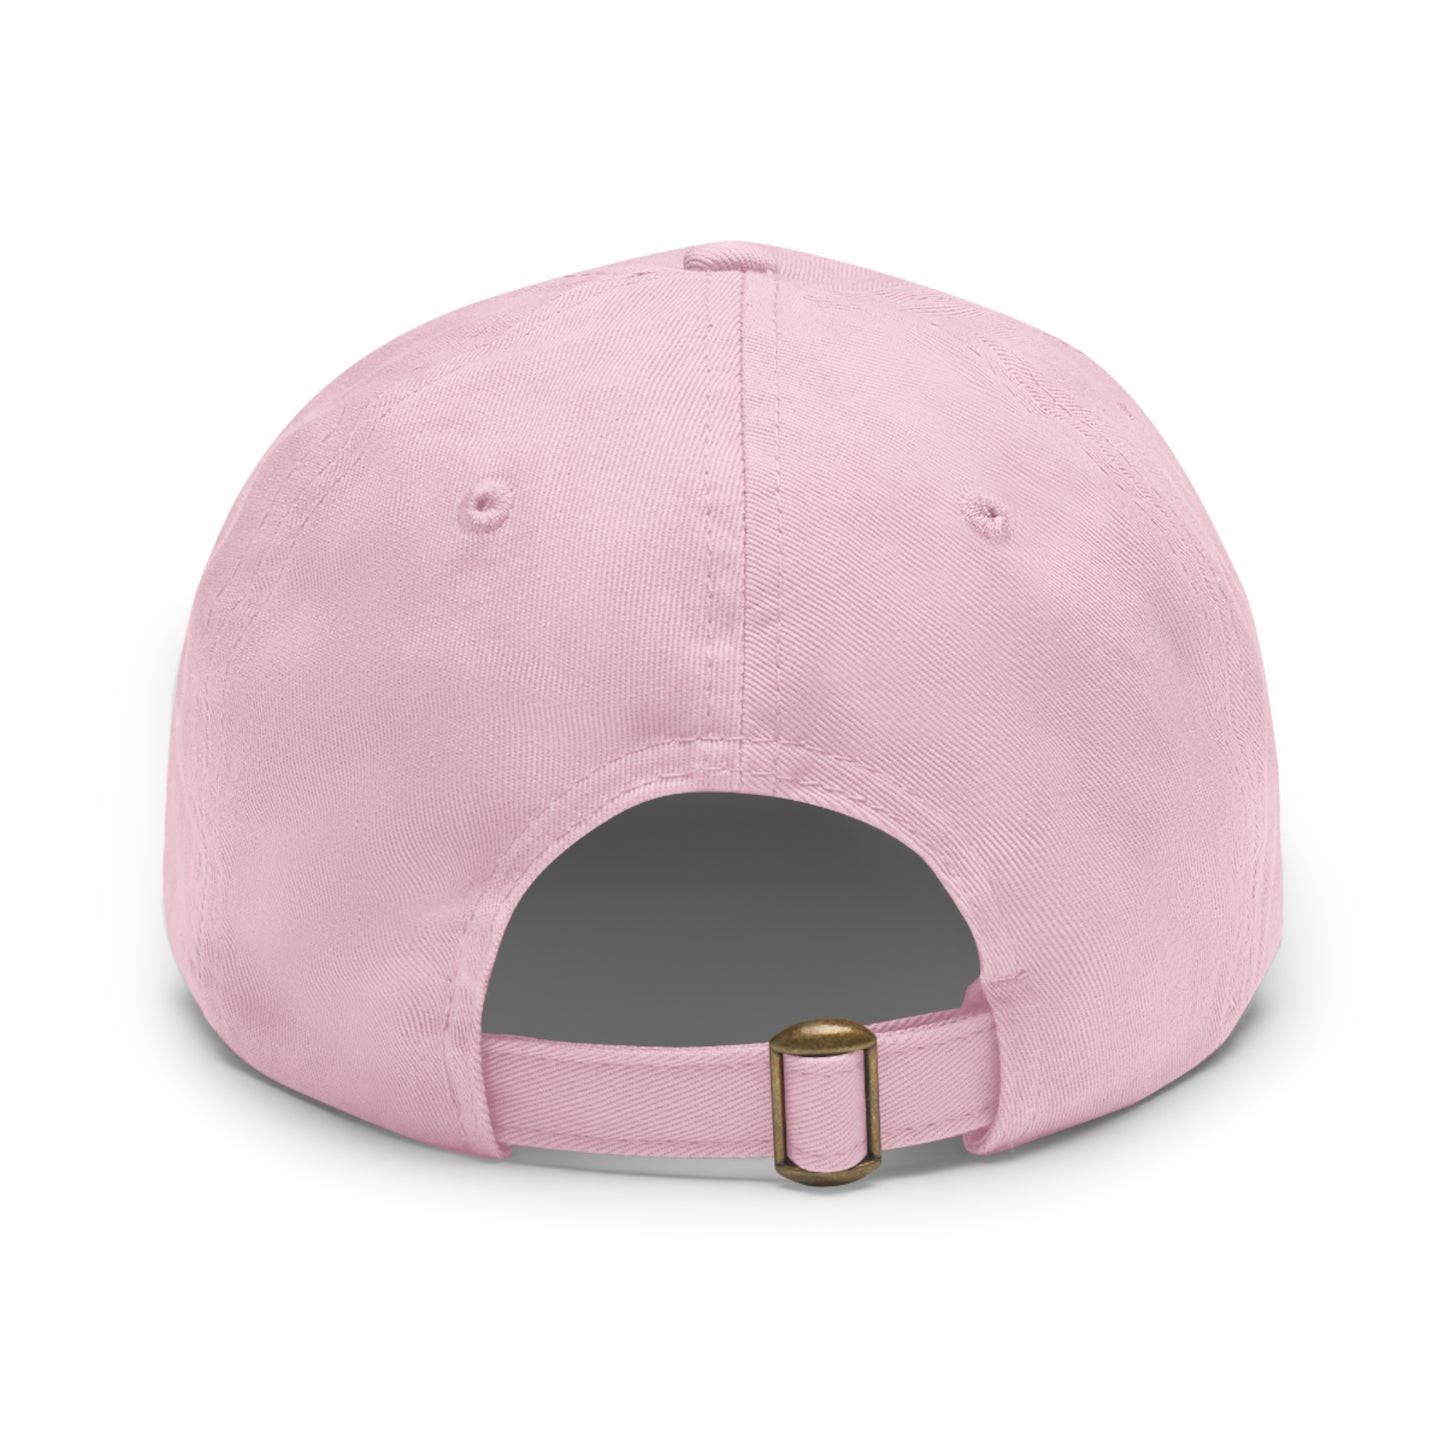 I Am Kenough - Dad Hat with Leather Patch (Rectangle)